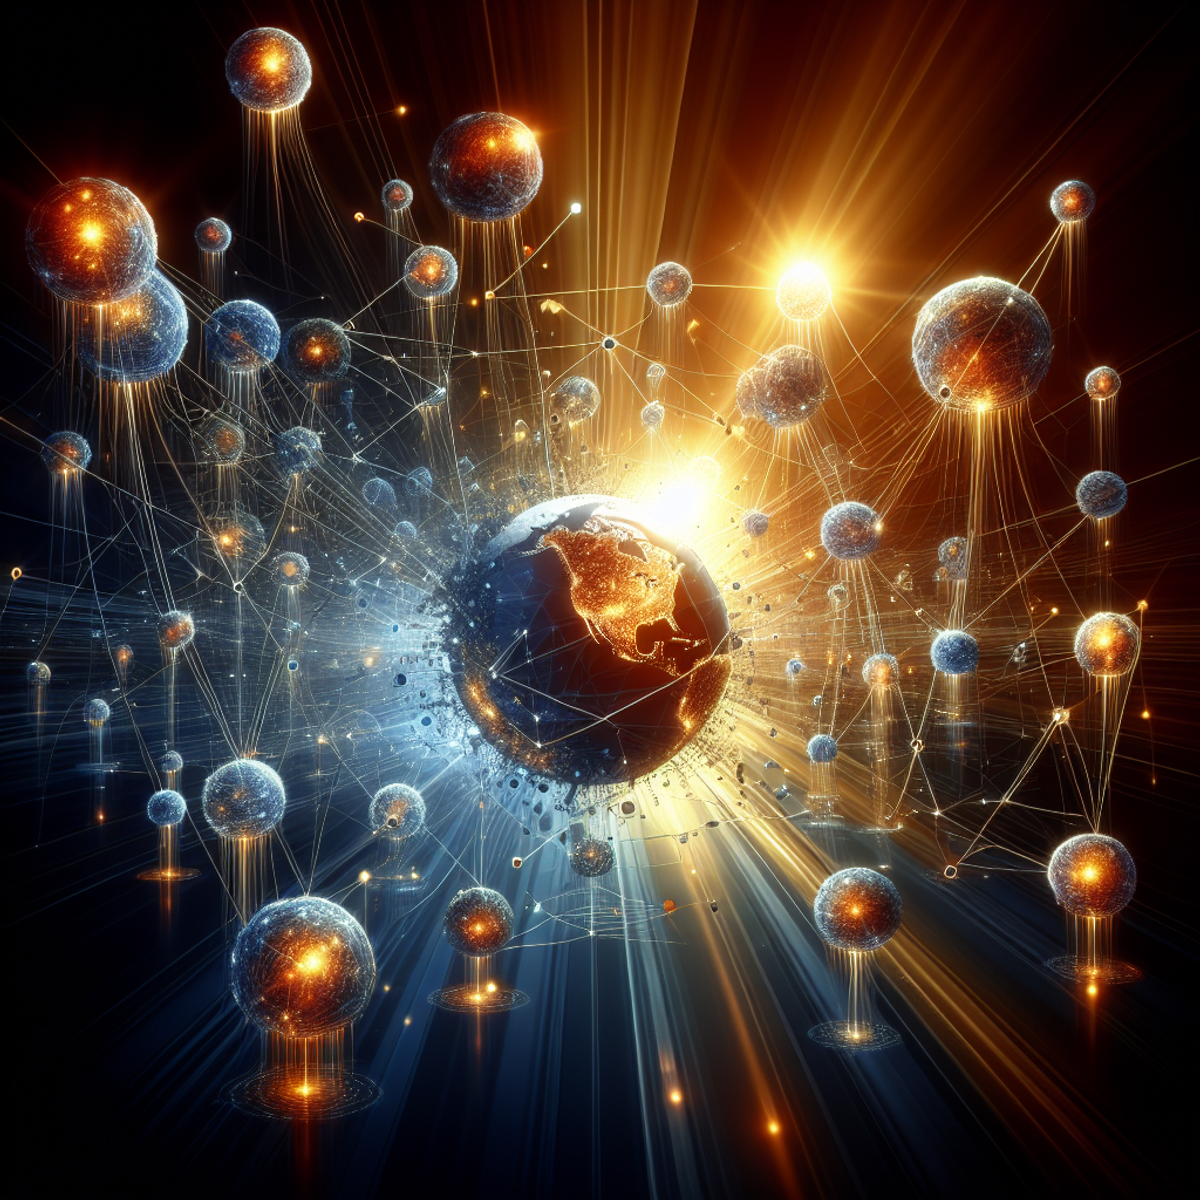 A network of interconnected globes representing websites, with strings of radiant light symbolizing backlinks that boost credibility and visibility online.